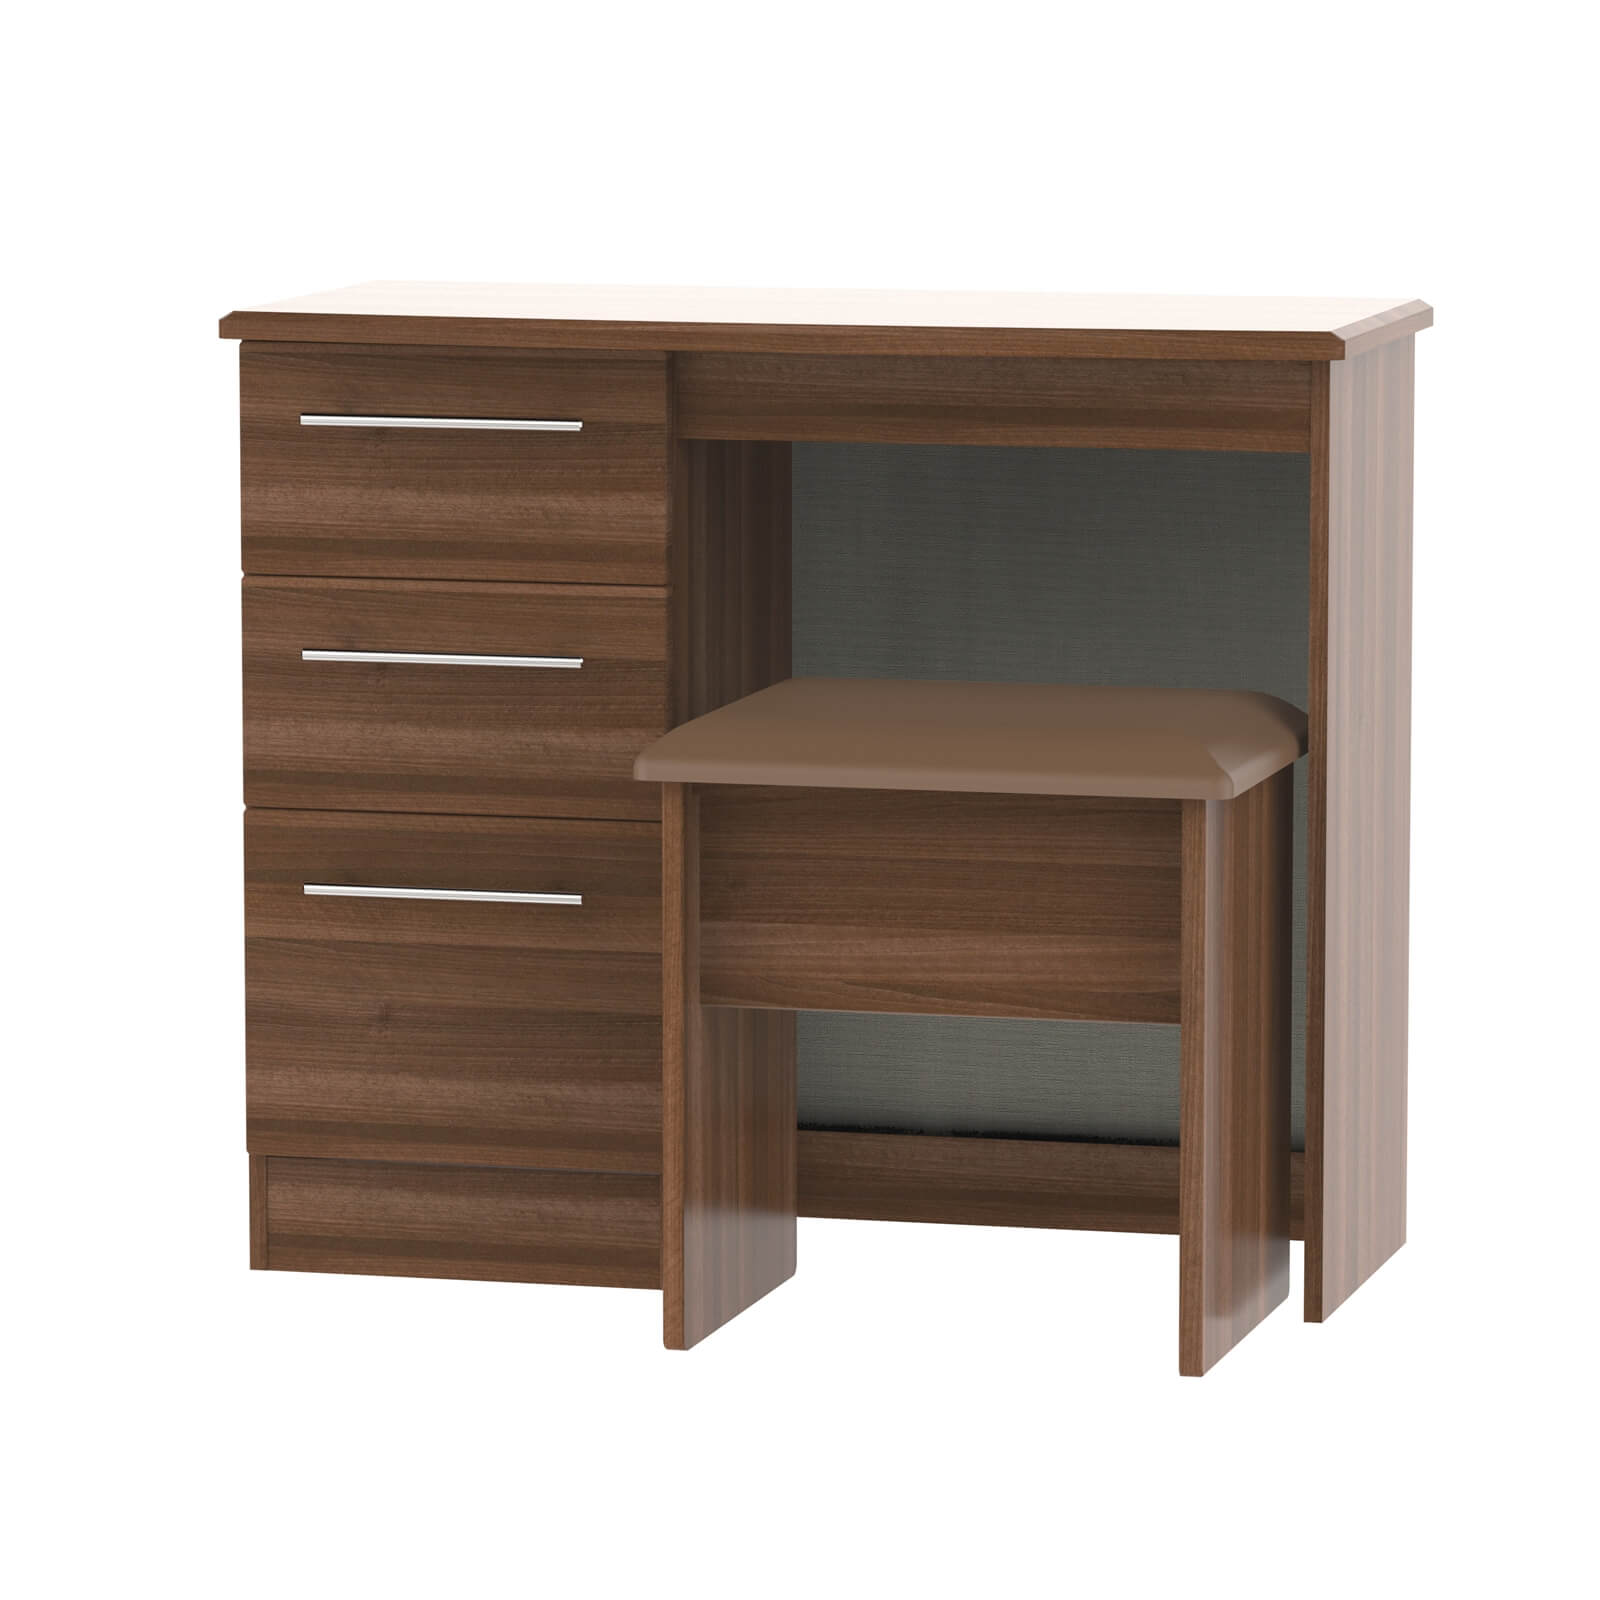 Siena Dressing Table and Stool Set - Noche